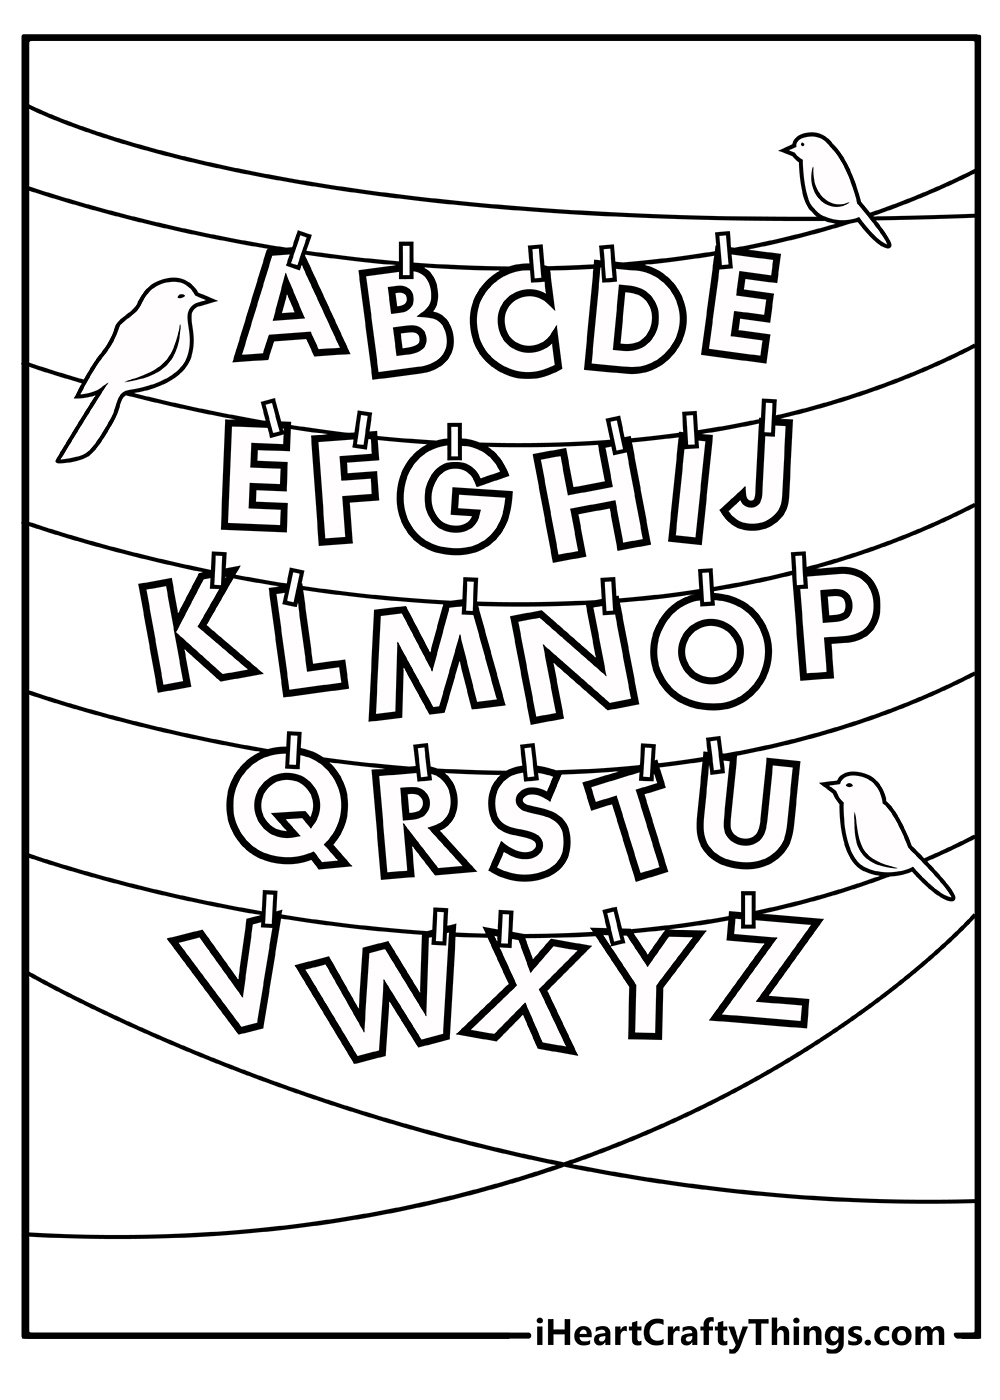 Alphabet Coloring Pages (100% Free Printables) intended for Free Printable Alphabet Letters Coloring Pages